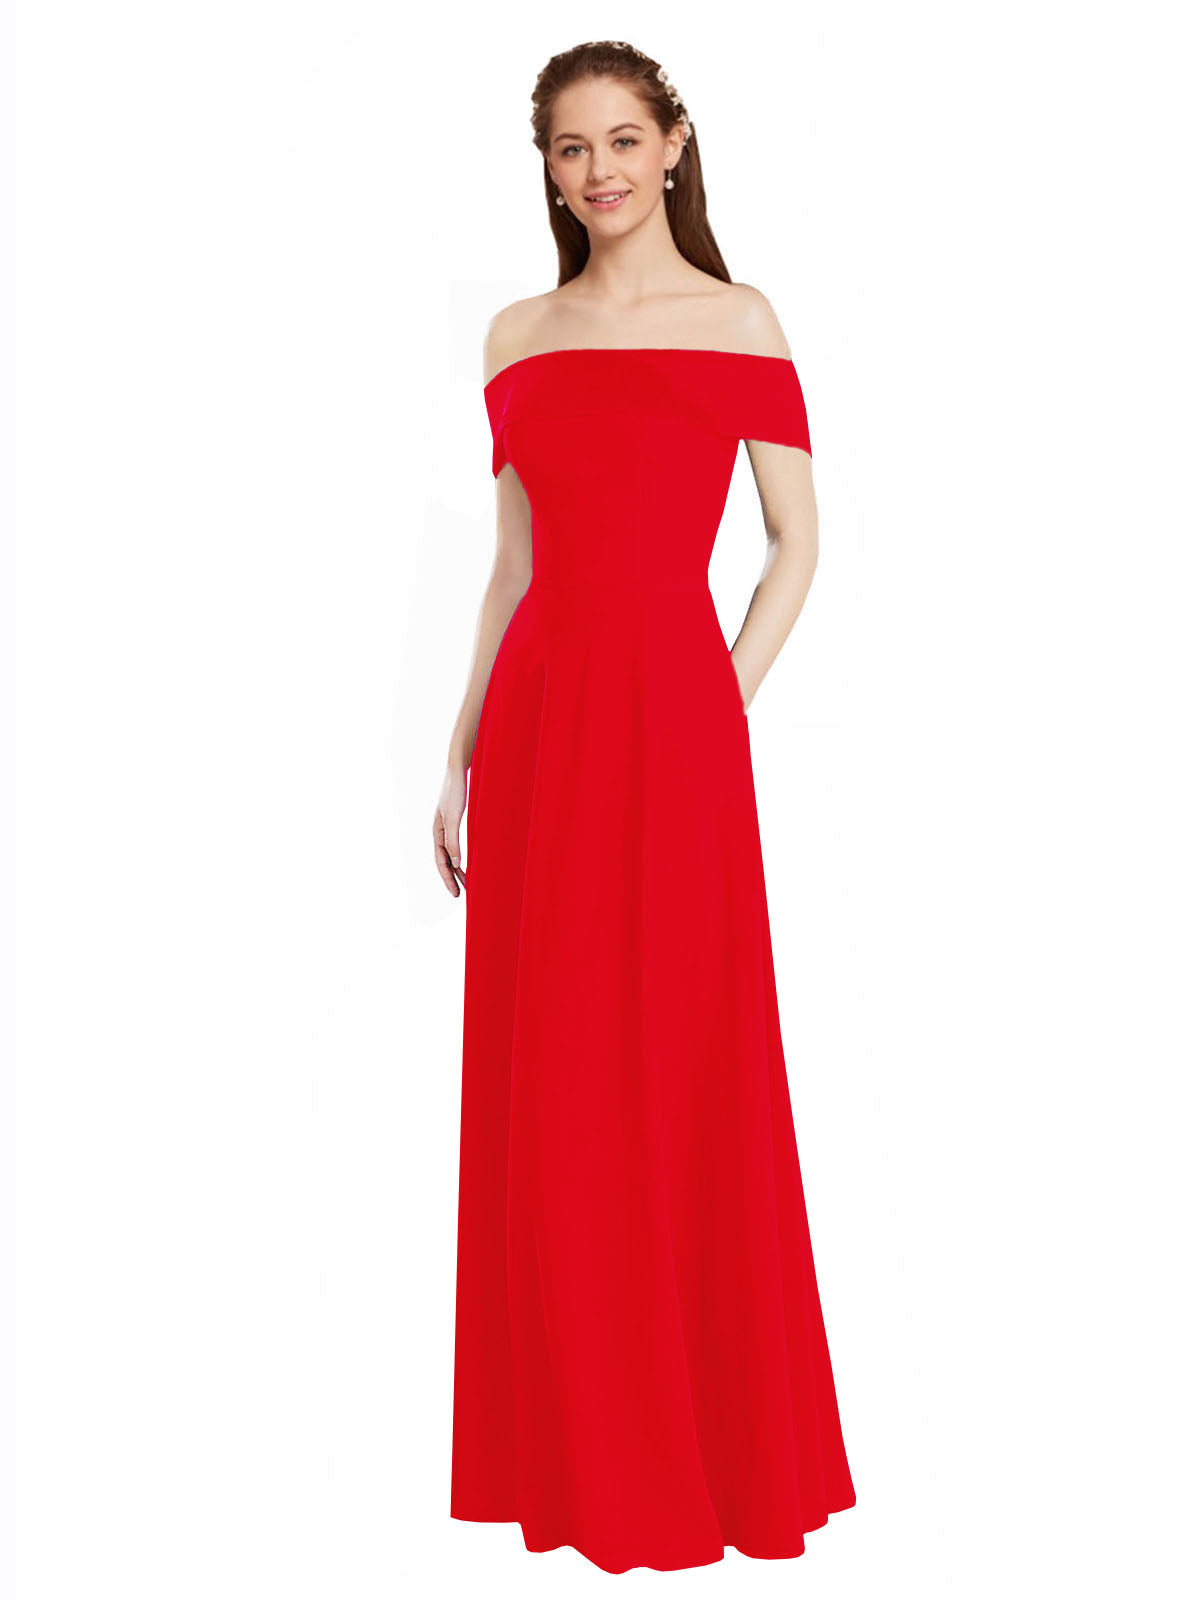 Red A-Line Off the Shoulder Cap Sleeves Long Bridesmaid Dress Lina